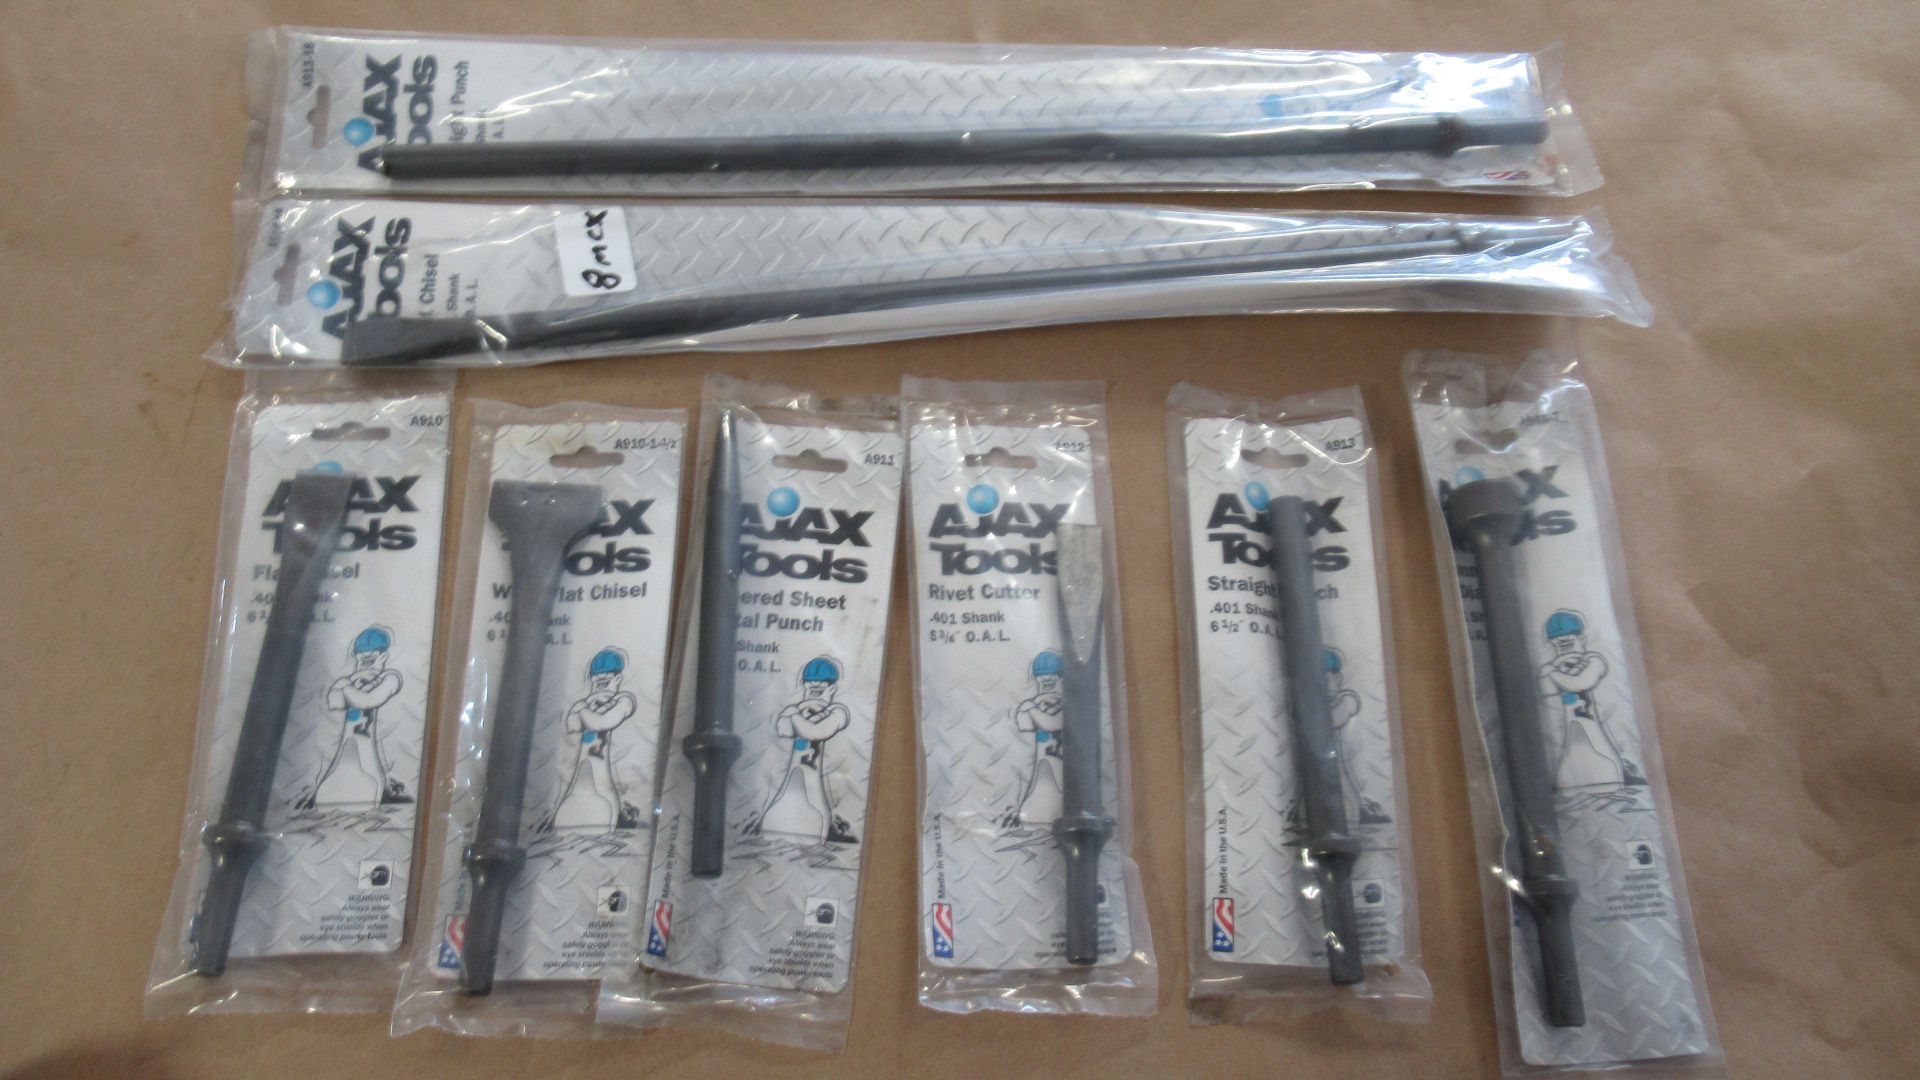 LOT OF 8 CHISELS & PUNCHES ASST AJAX TOOLS